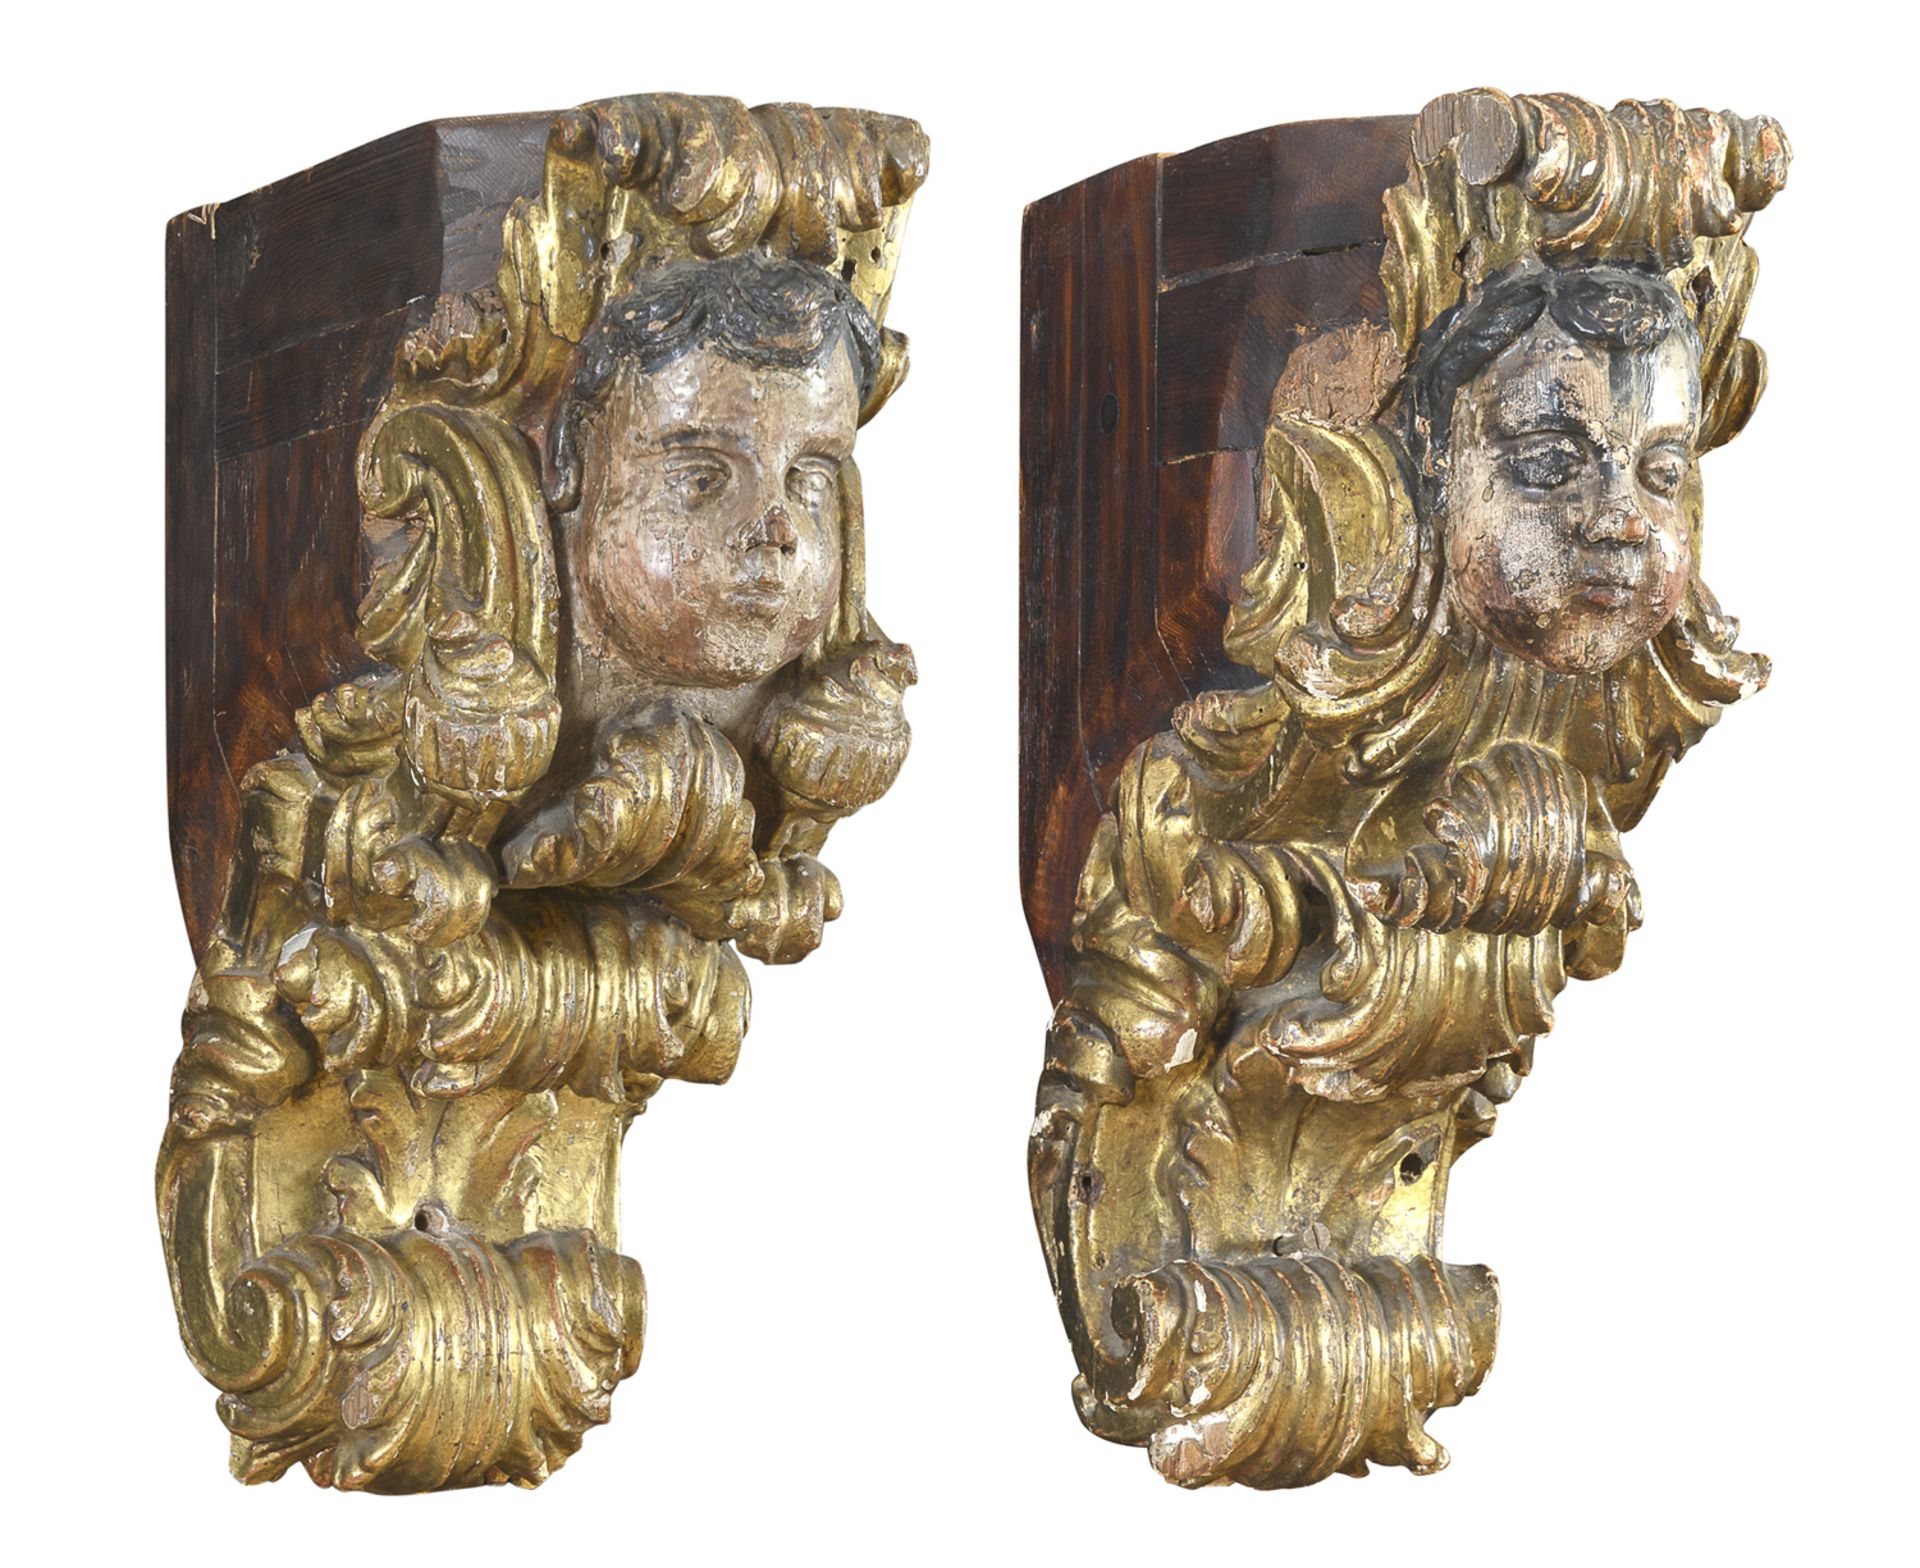 PAIR OF WOOD SHELVES NORTHERN ITALY LATE 17th CENTURY - Image 2 of 2